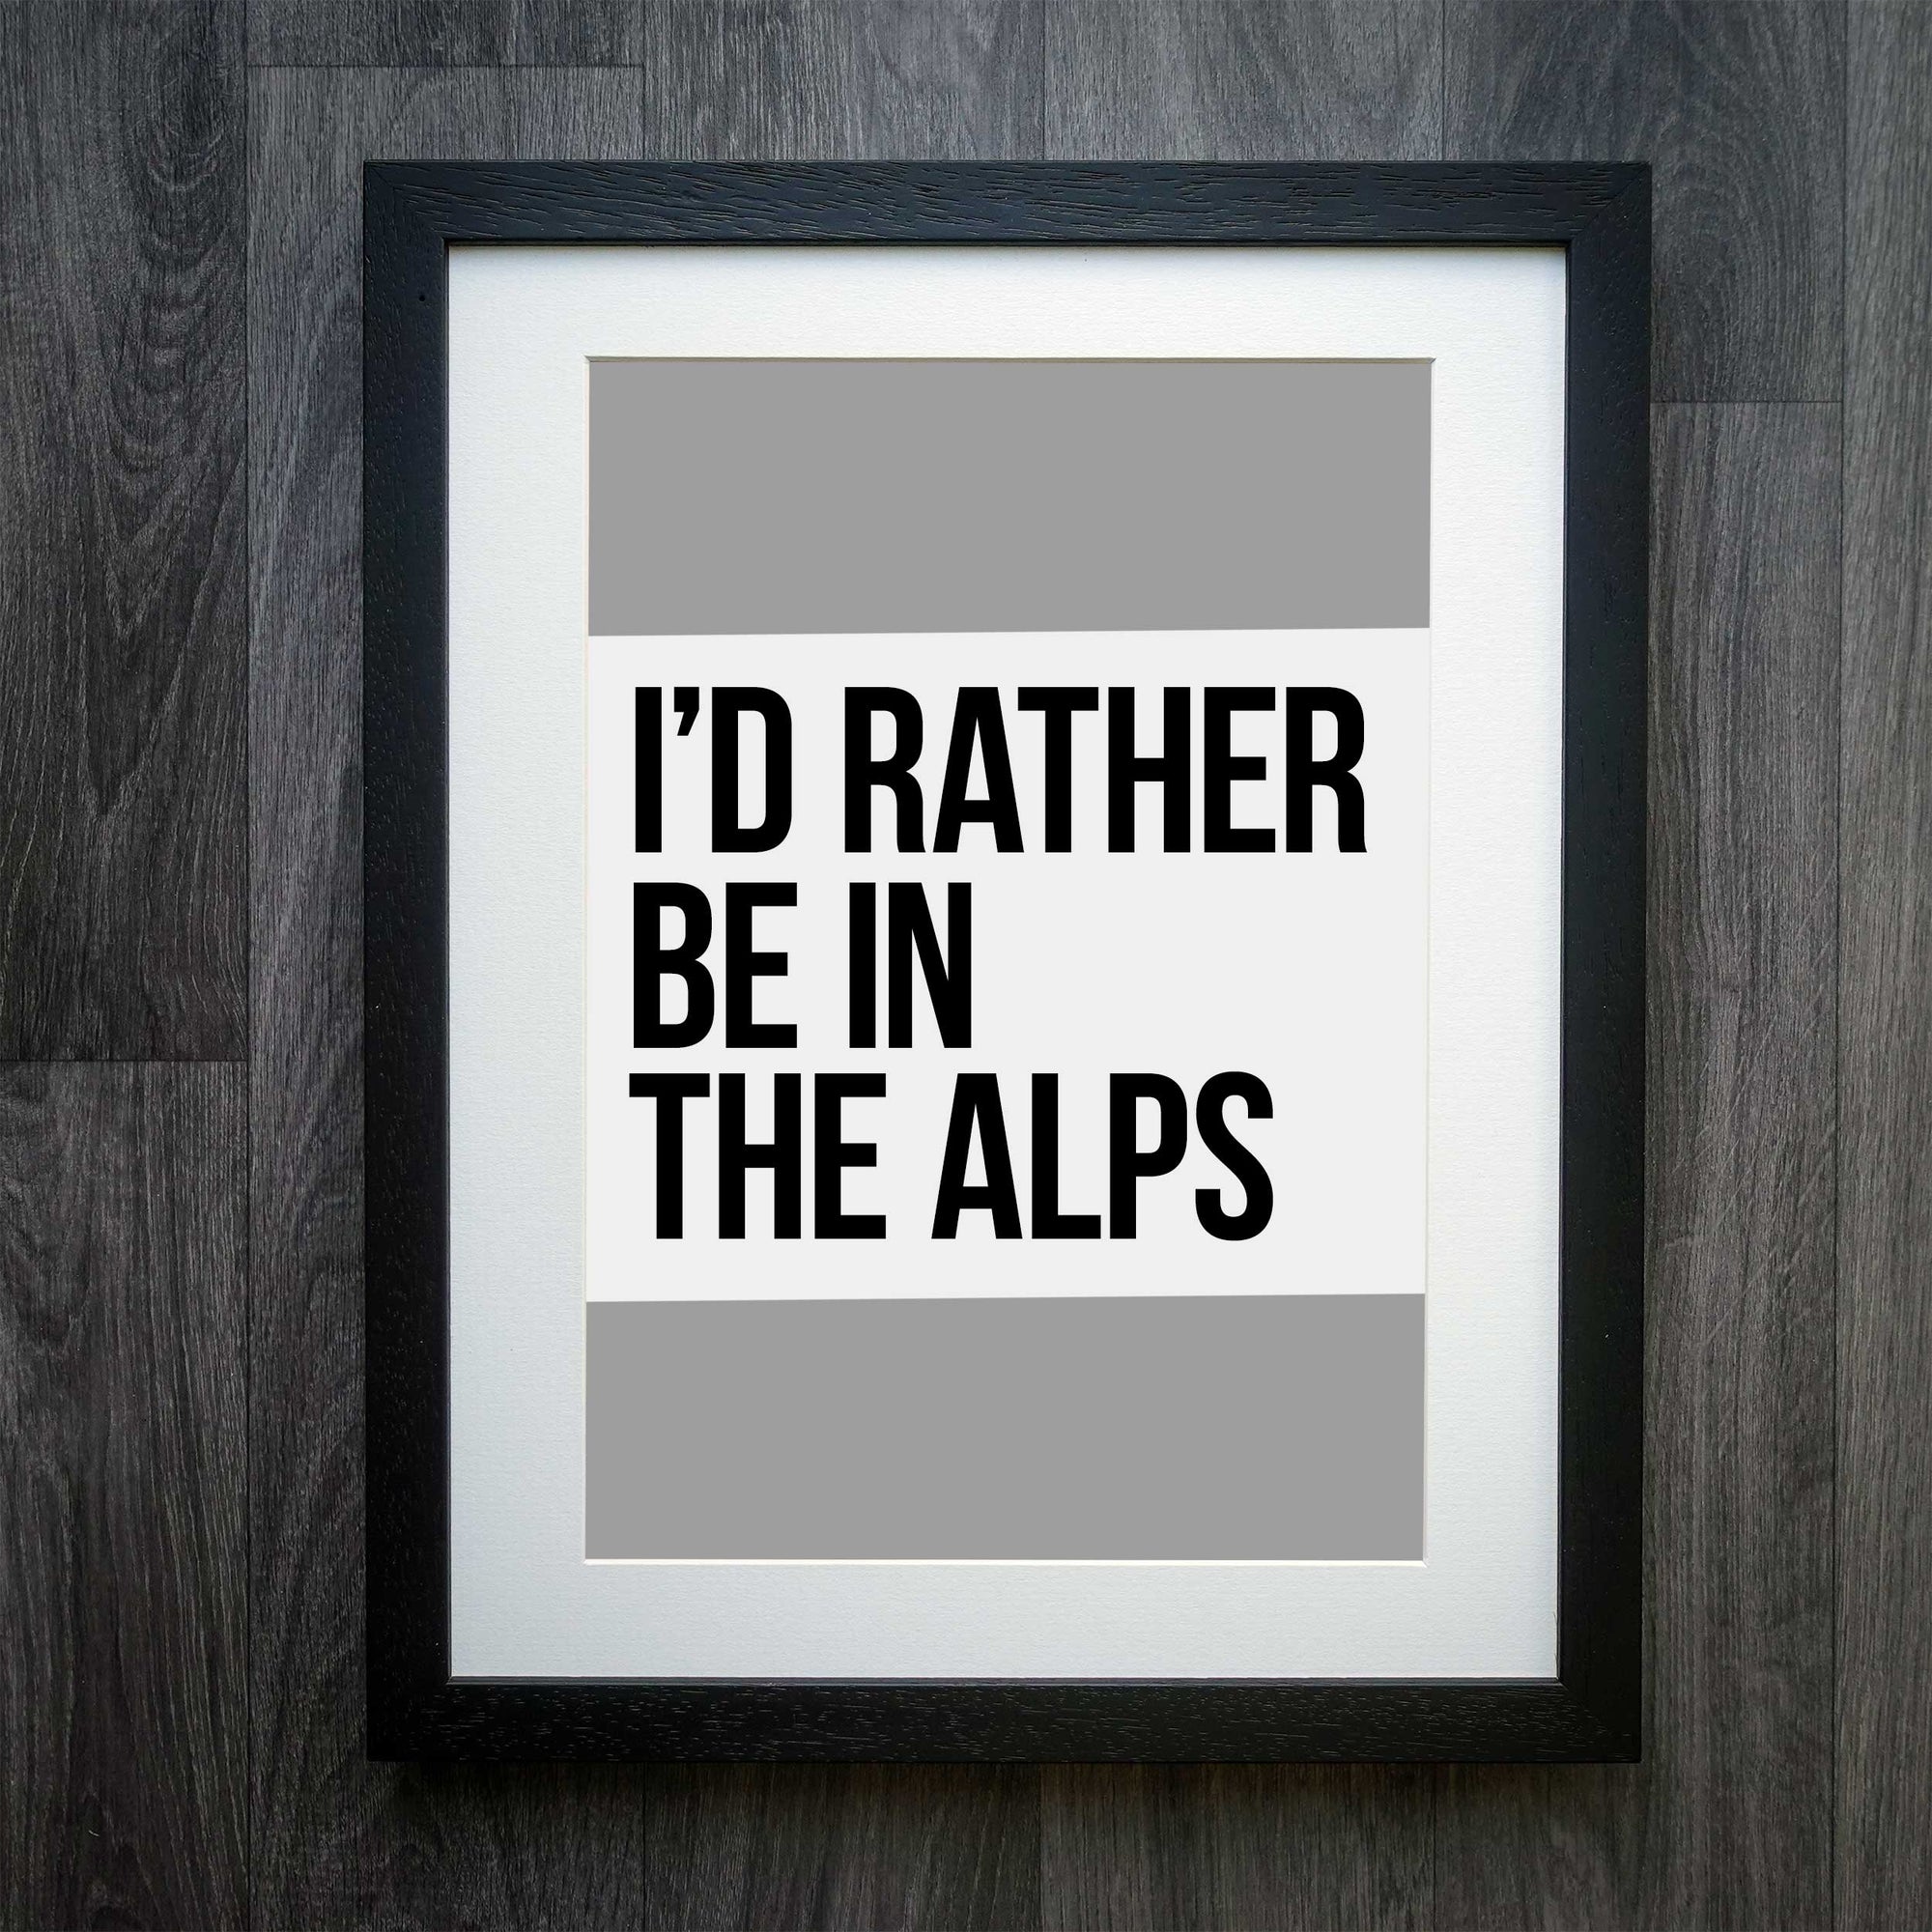 I'd Rather Be In The Alps: Customise Your Ideal Location Print